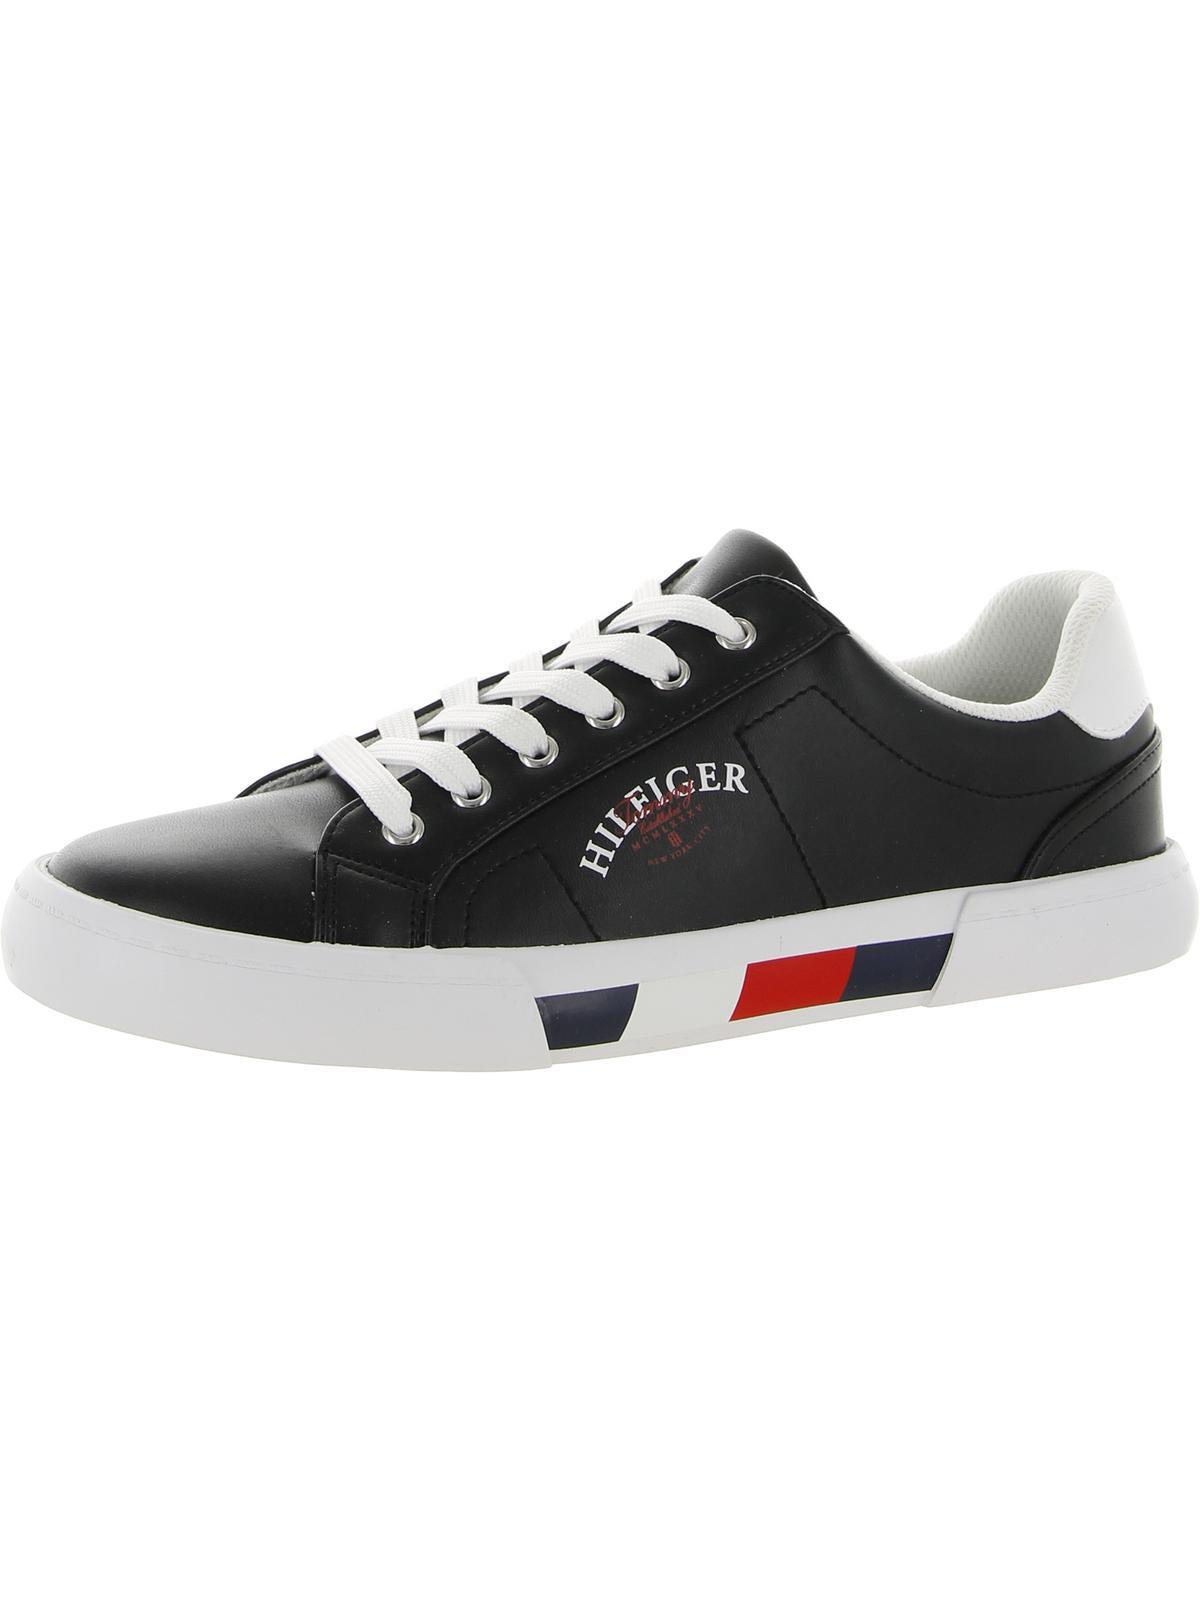 Tommy Hilfiger Casual Fashion Casual Sneakers in Black | Lyst